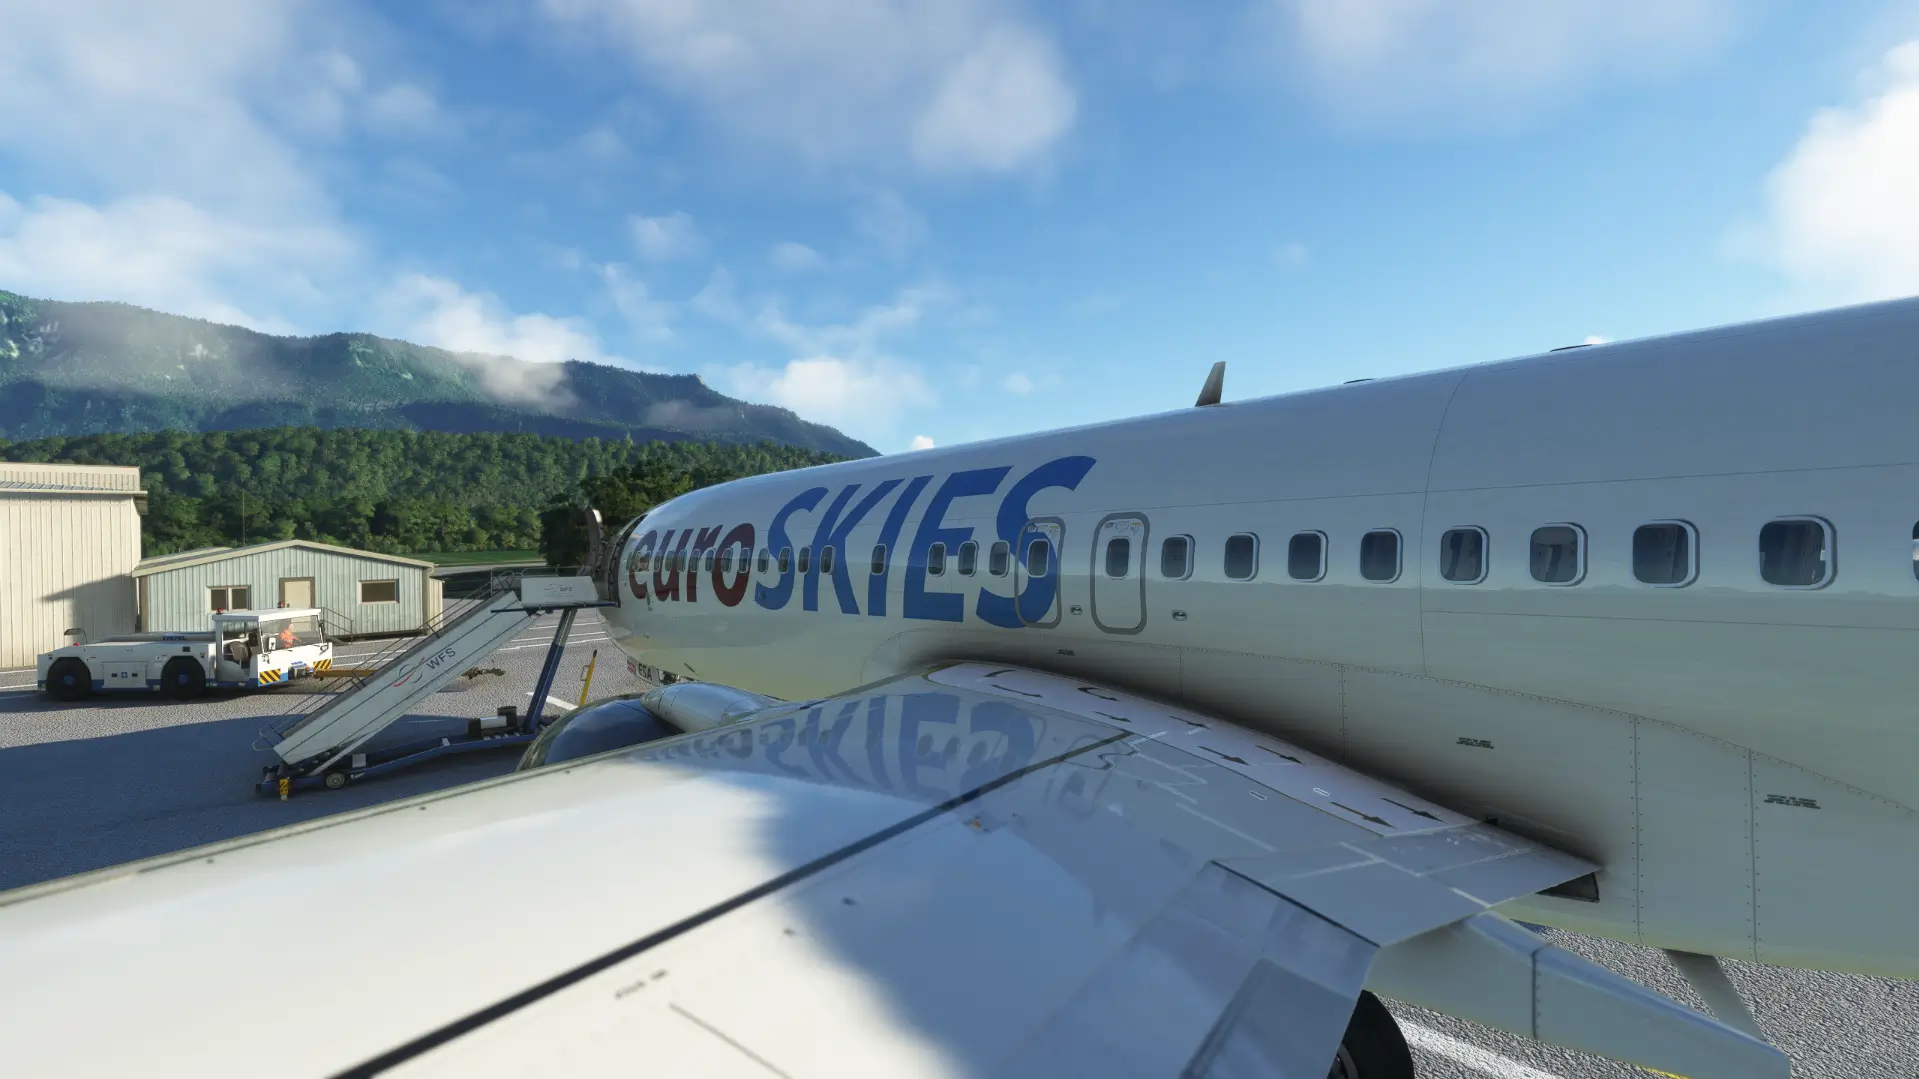 euroSKIES virtual airline aircraft on the ground with stairs on apron in front of a forest and mountains.